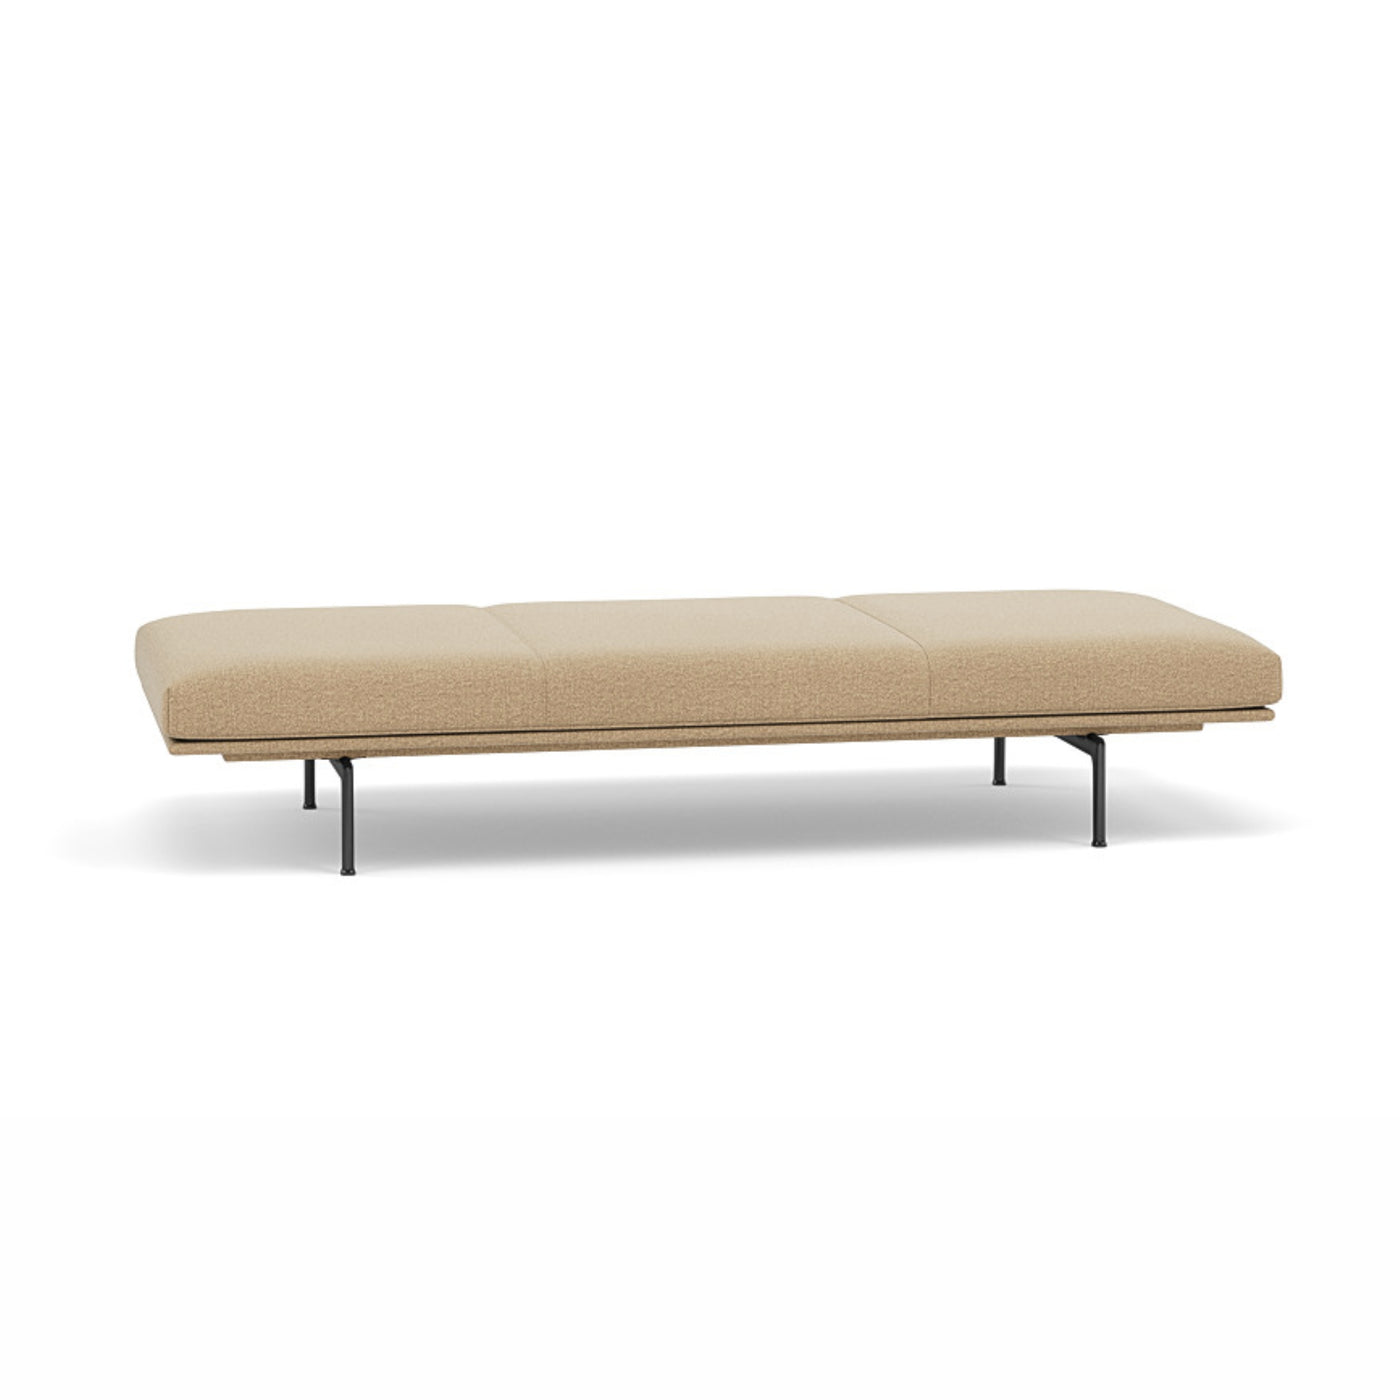 Muuto Outline Daybed, made to order from someday designs.#colour_ecriture-240